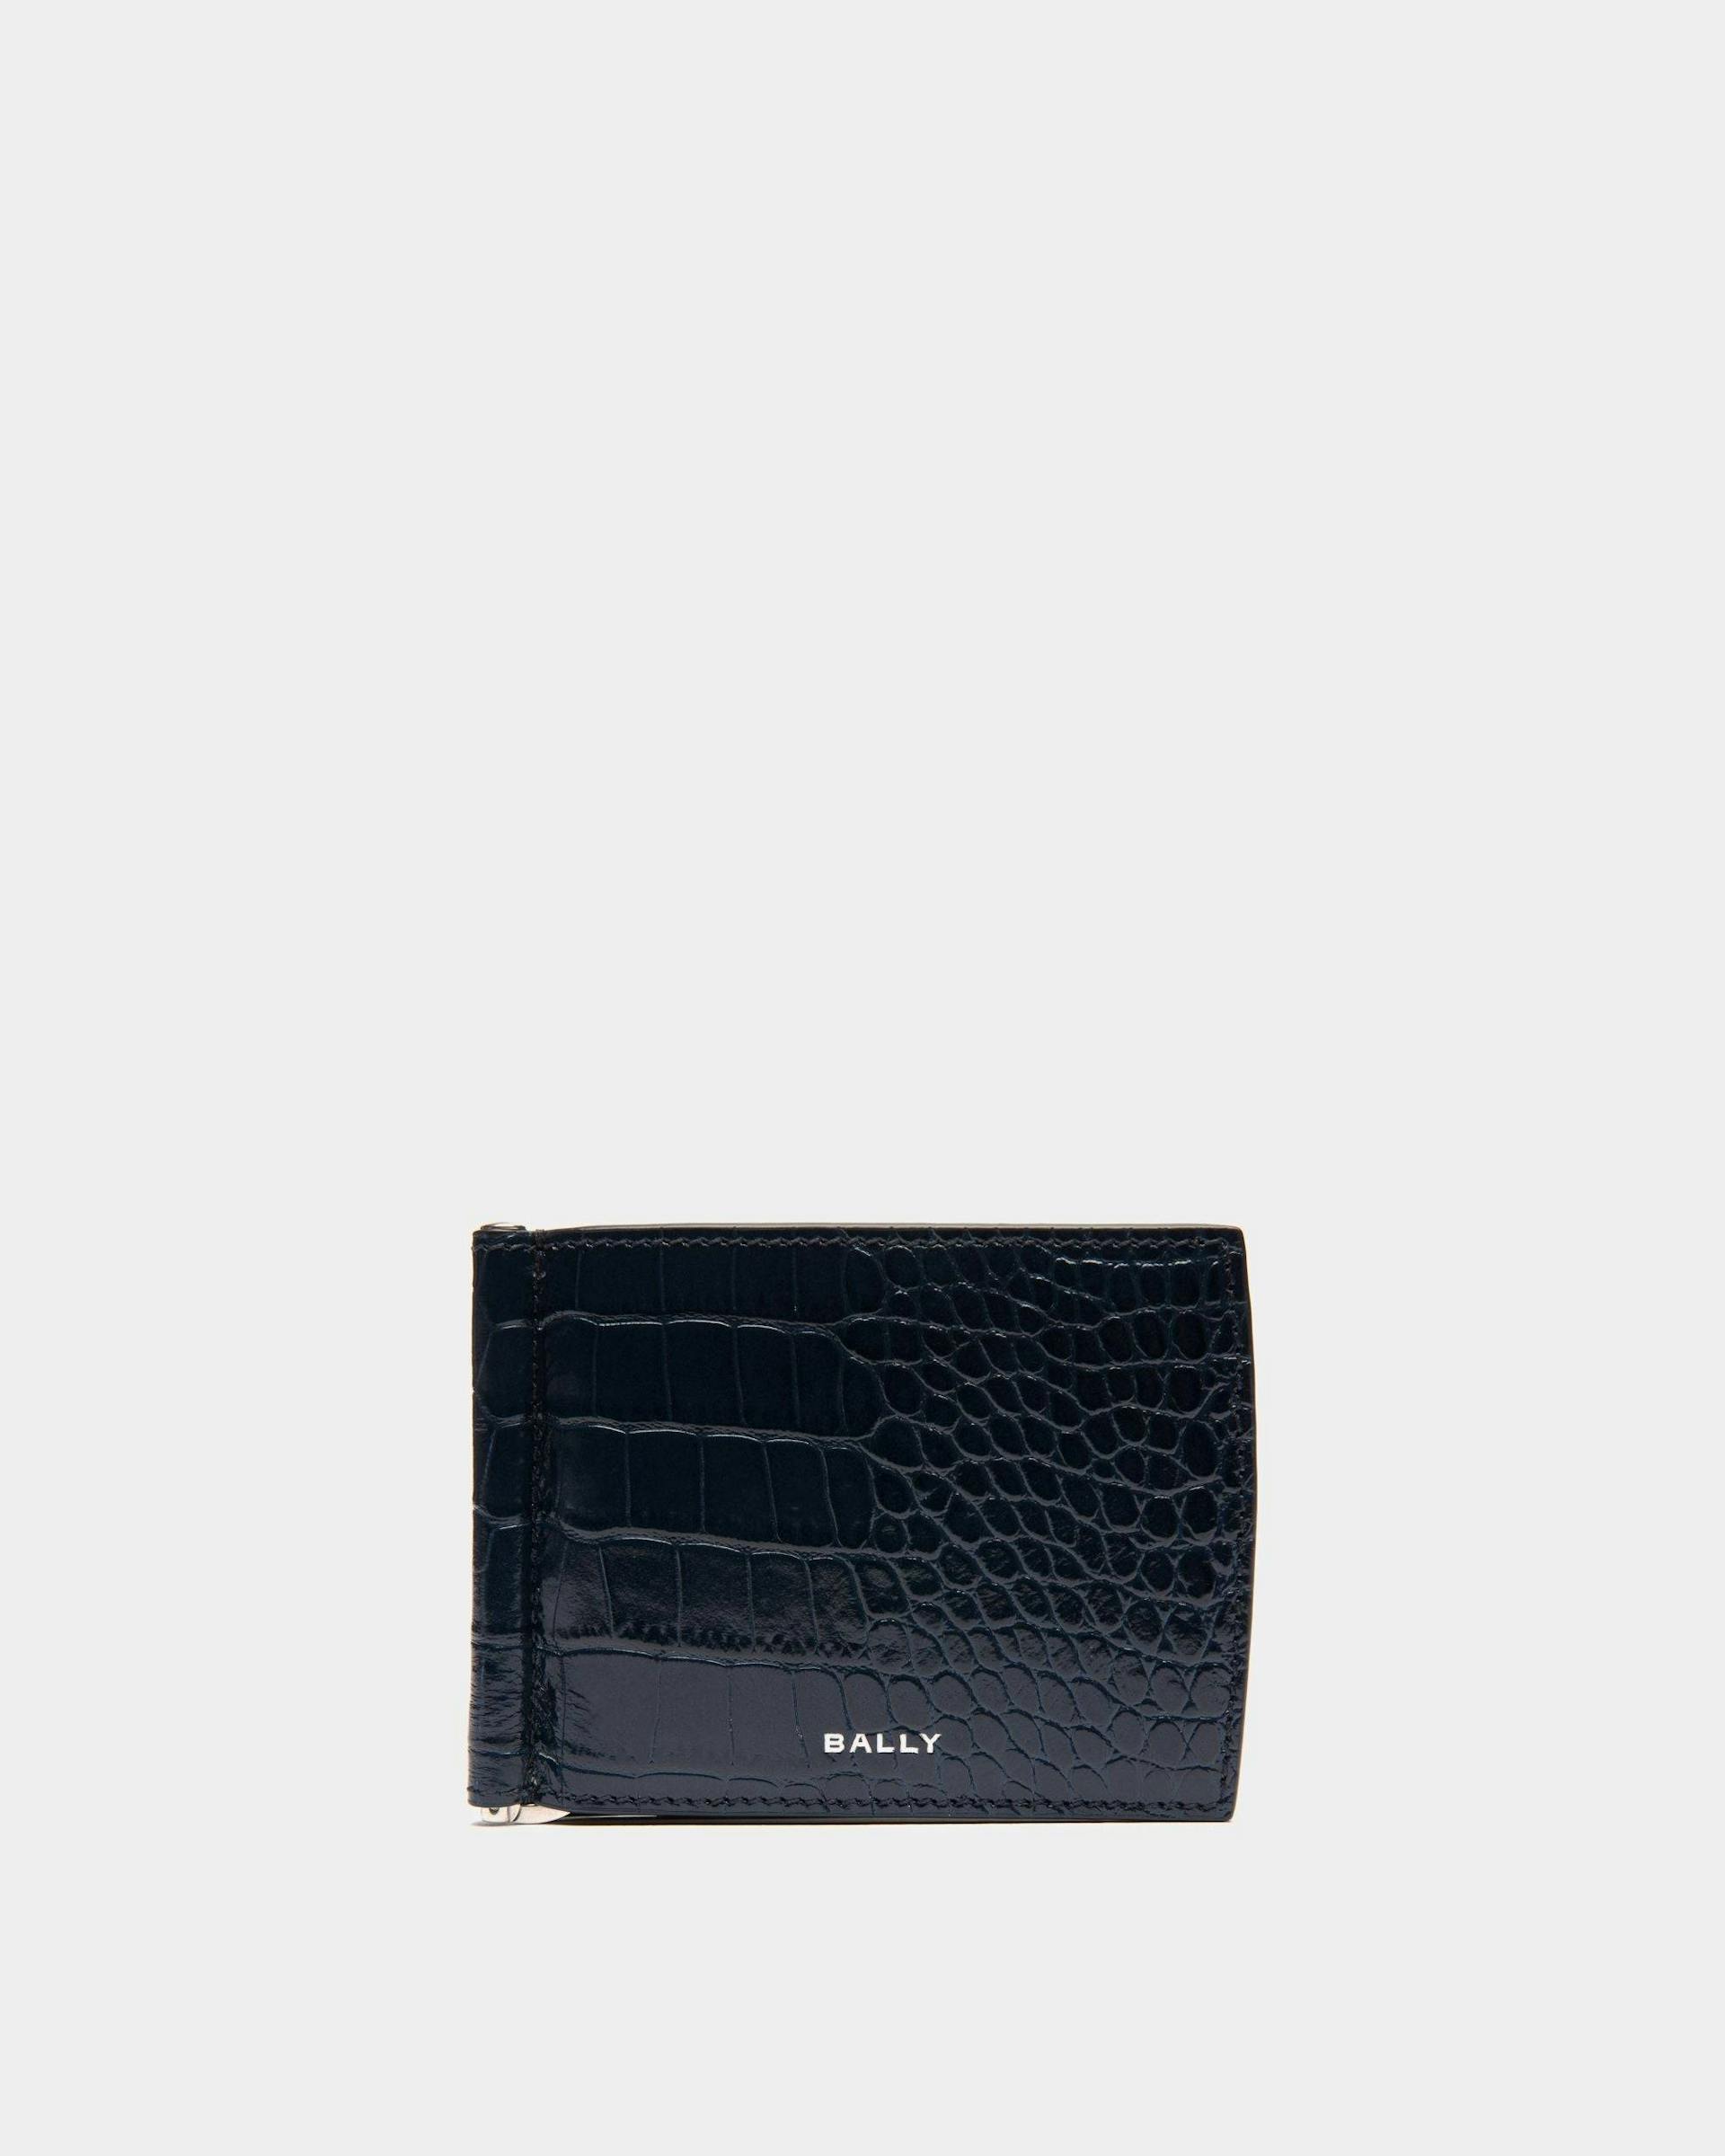 Men's Busy Bally Bifold Wallet in Crocodile Print Leather | Bally | Still Life Front